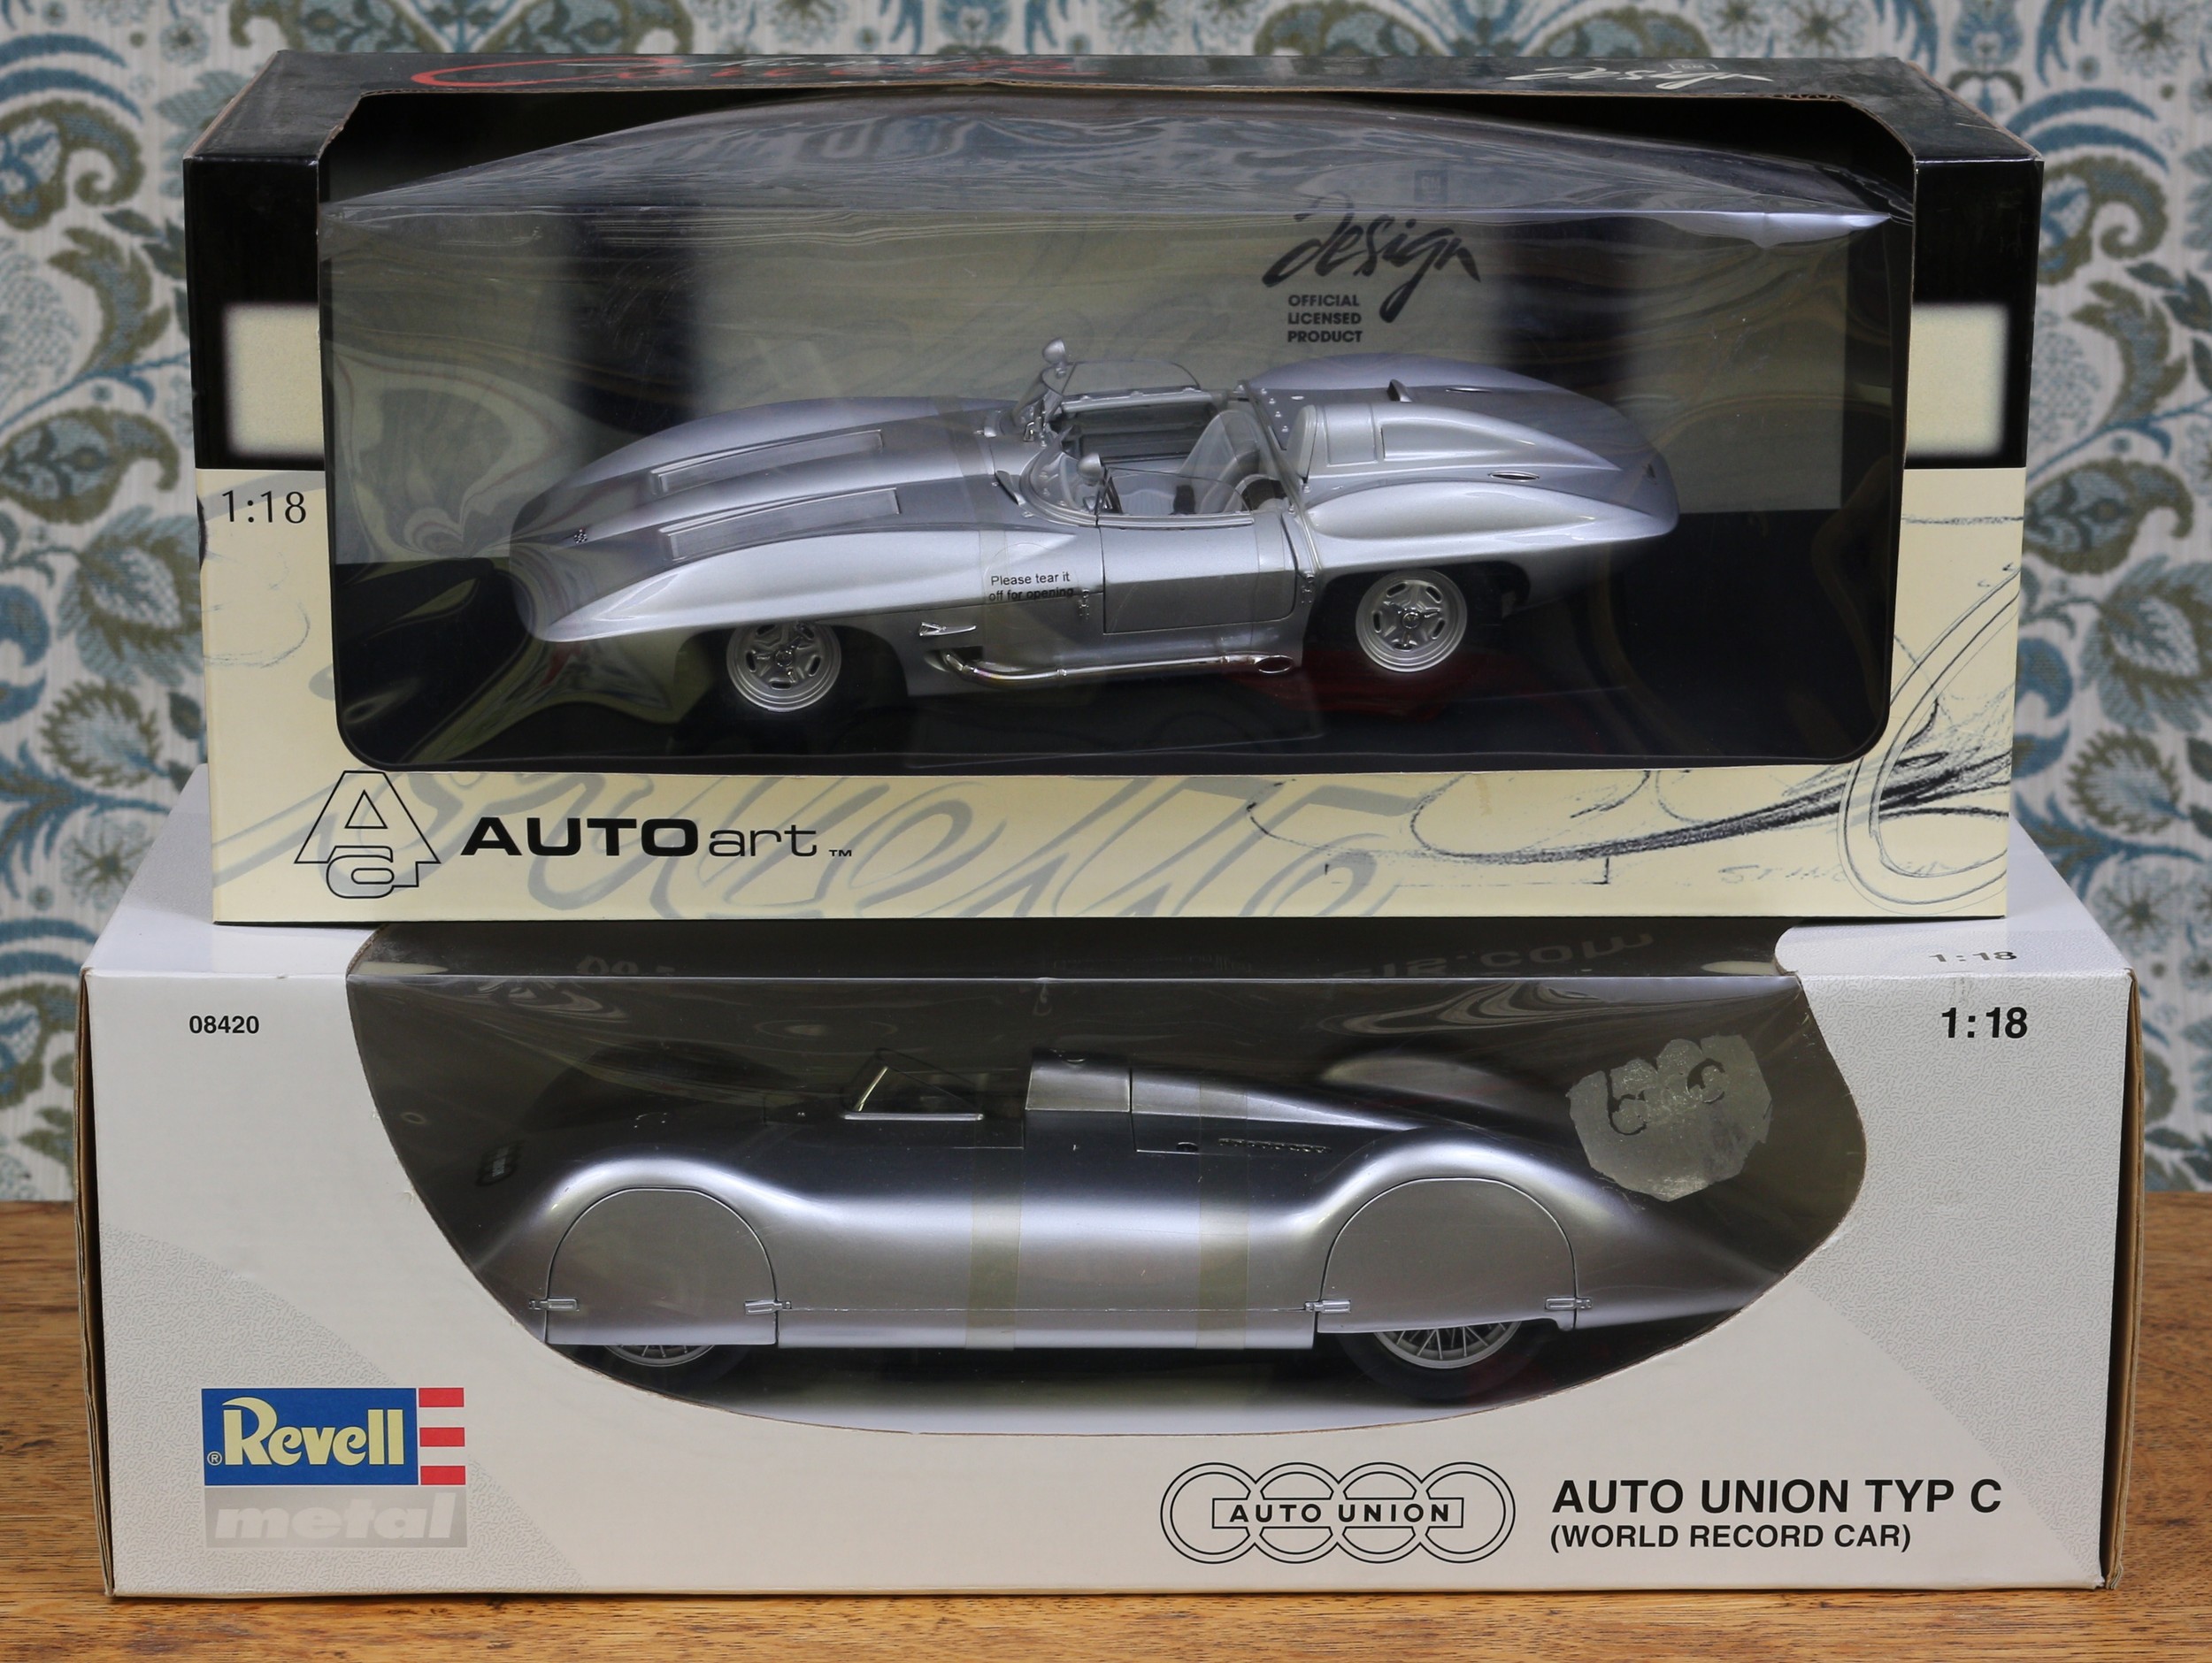 A Revell 1:18 scale No.08420 Auto Union type C World Record car, window boxed and an Autoart 1:18